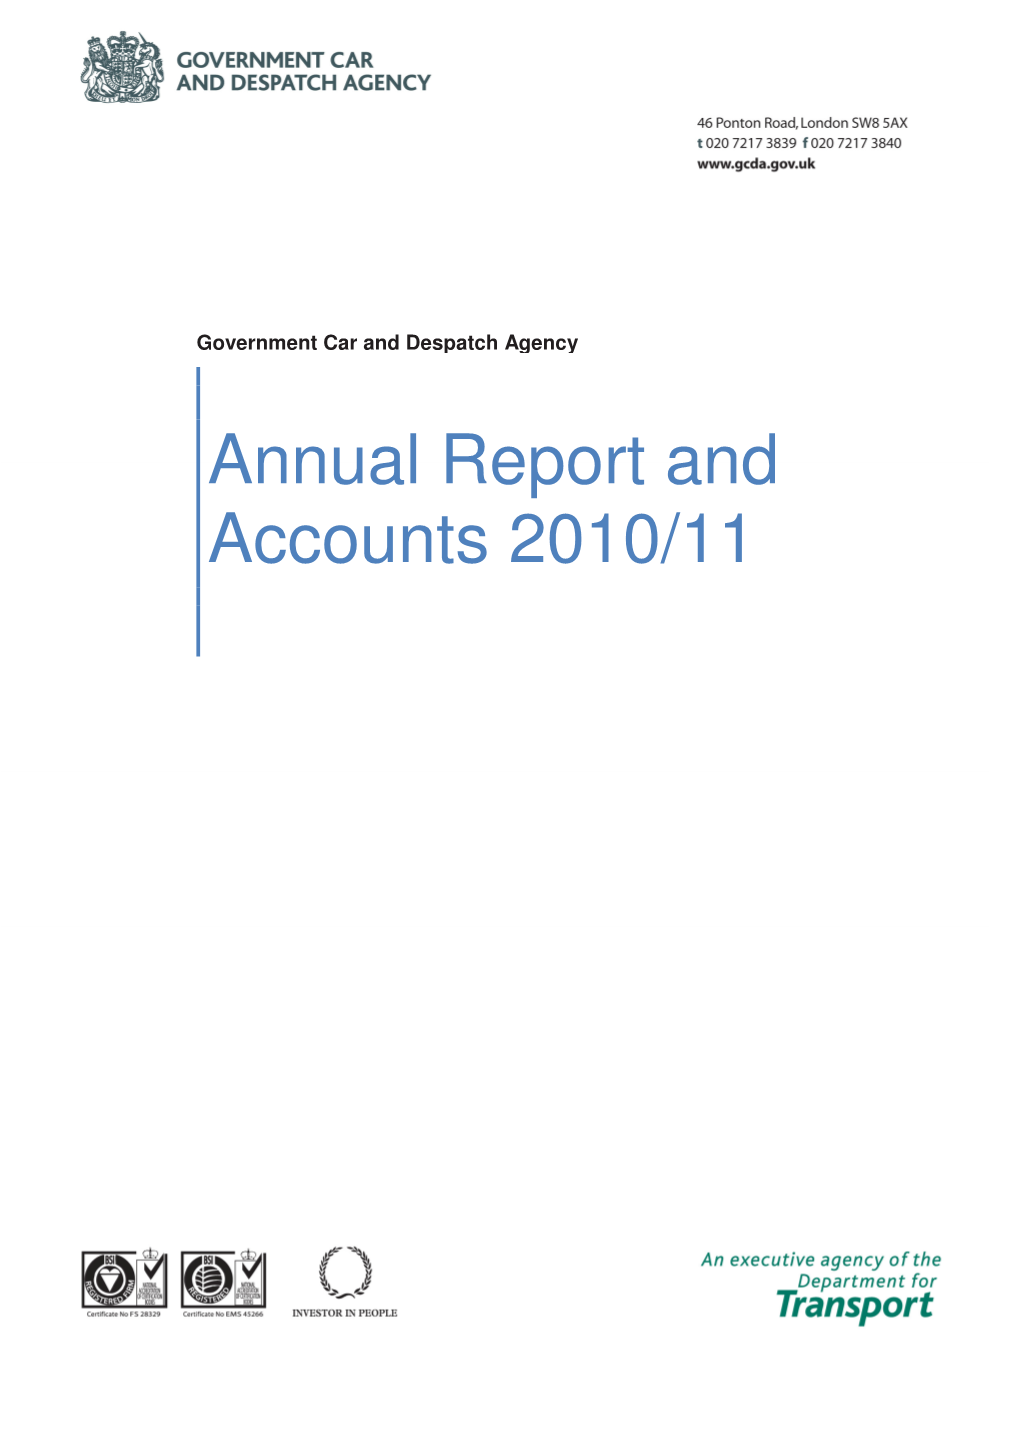 Government Car and Despatch Agency Annual Report And